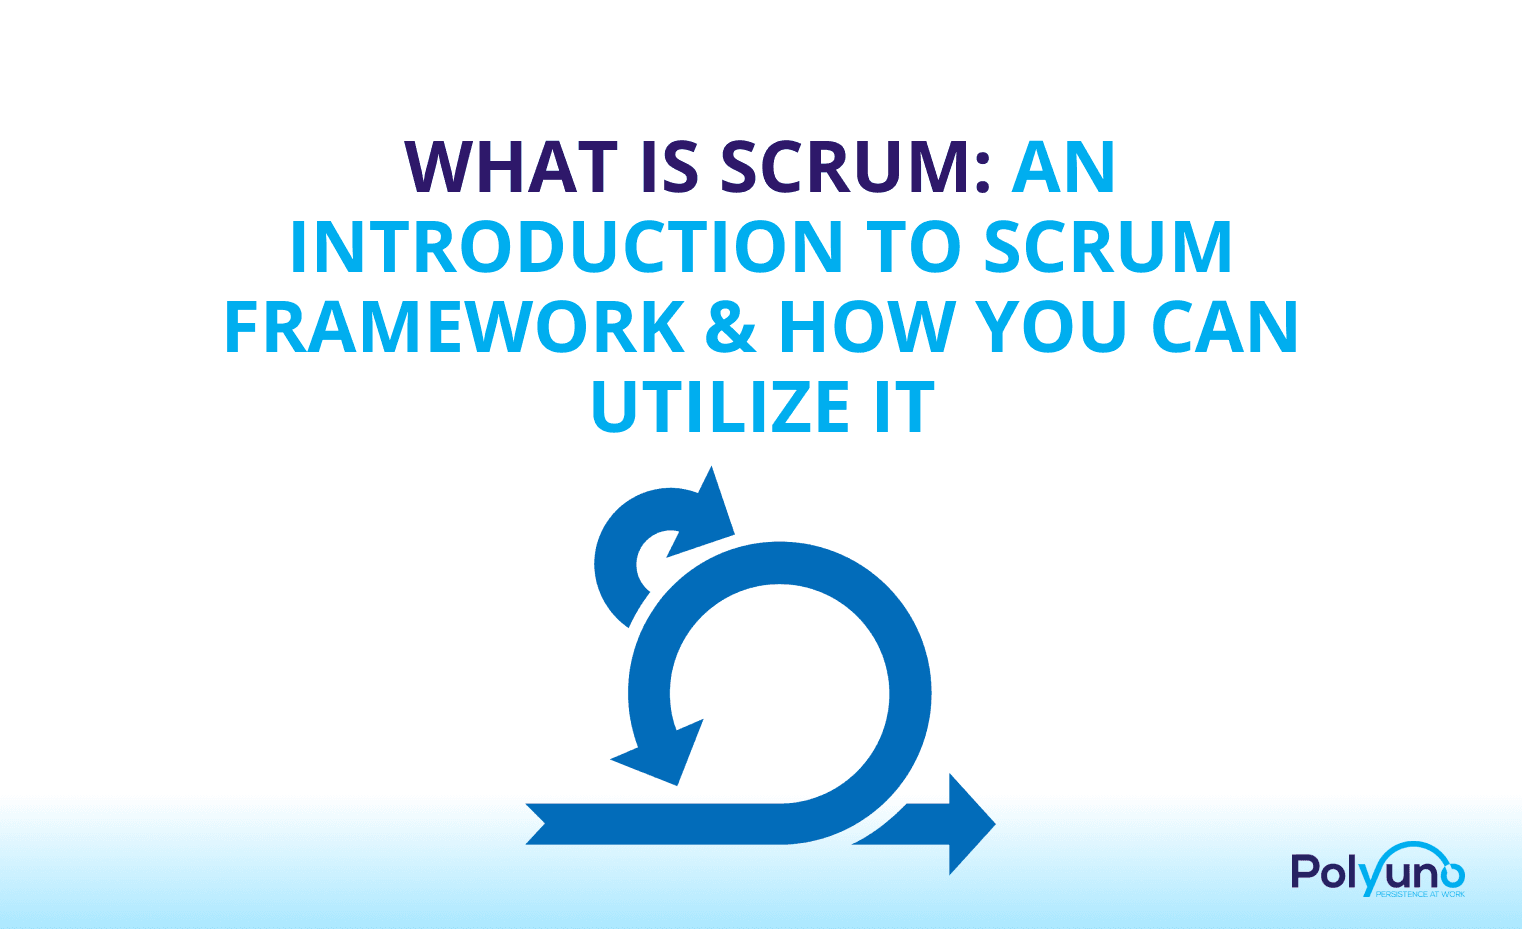 What Is Scrum: An Introduction To Scrum Framework & How You Can Utilize It